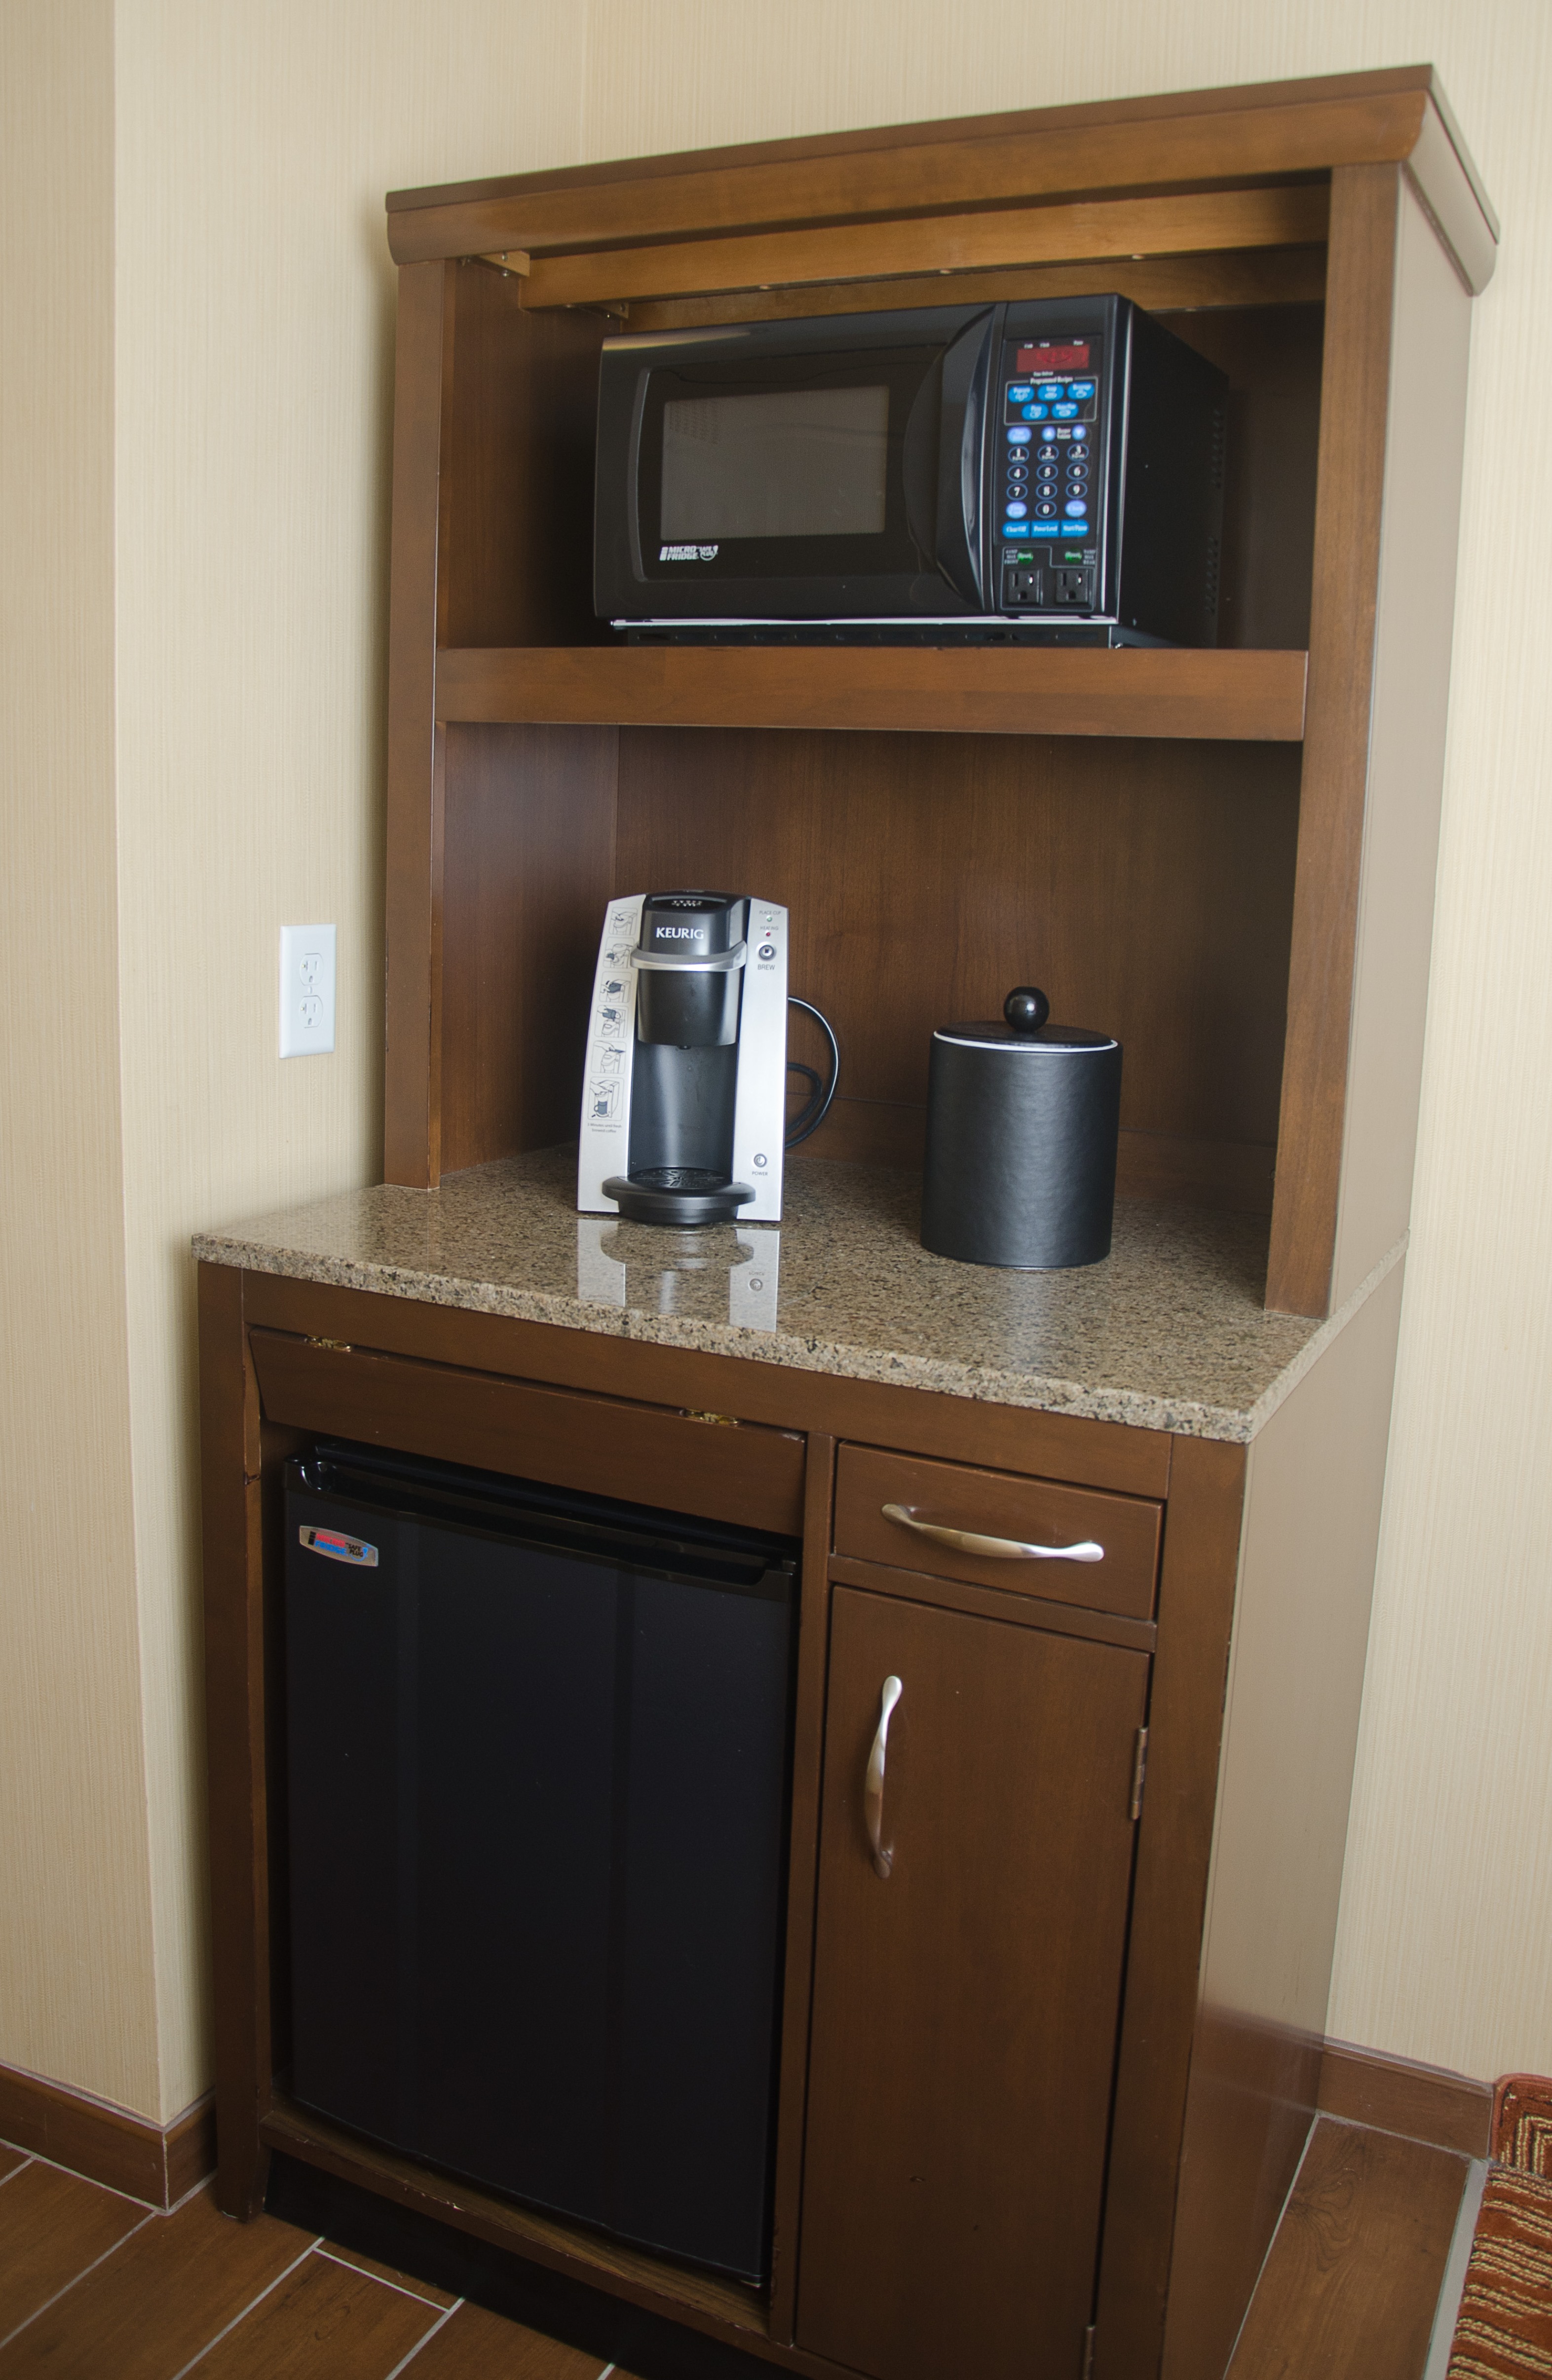 Kitchen area with microwave, coffee maker, and microfridge.